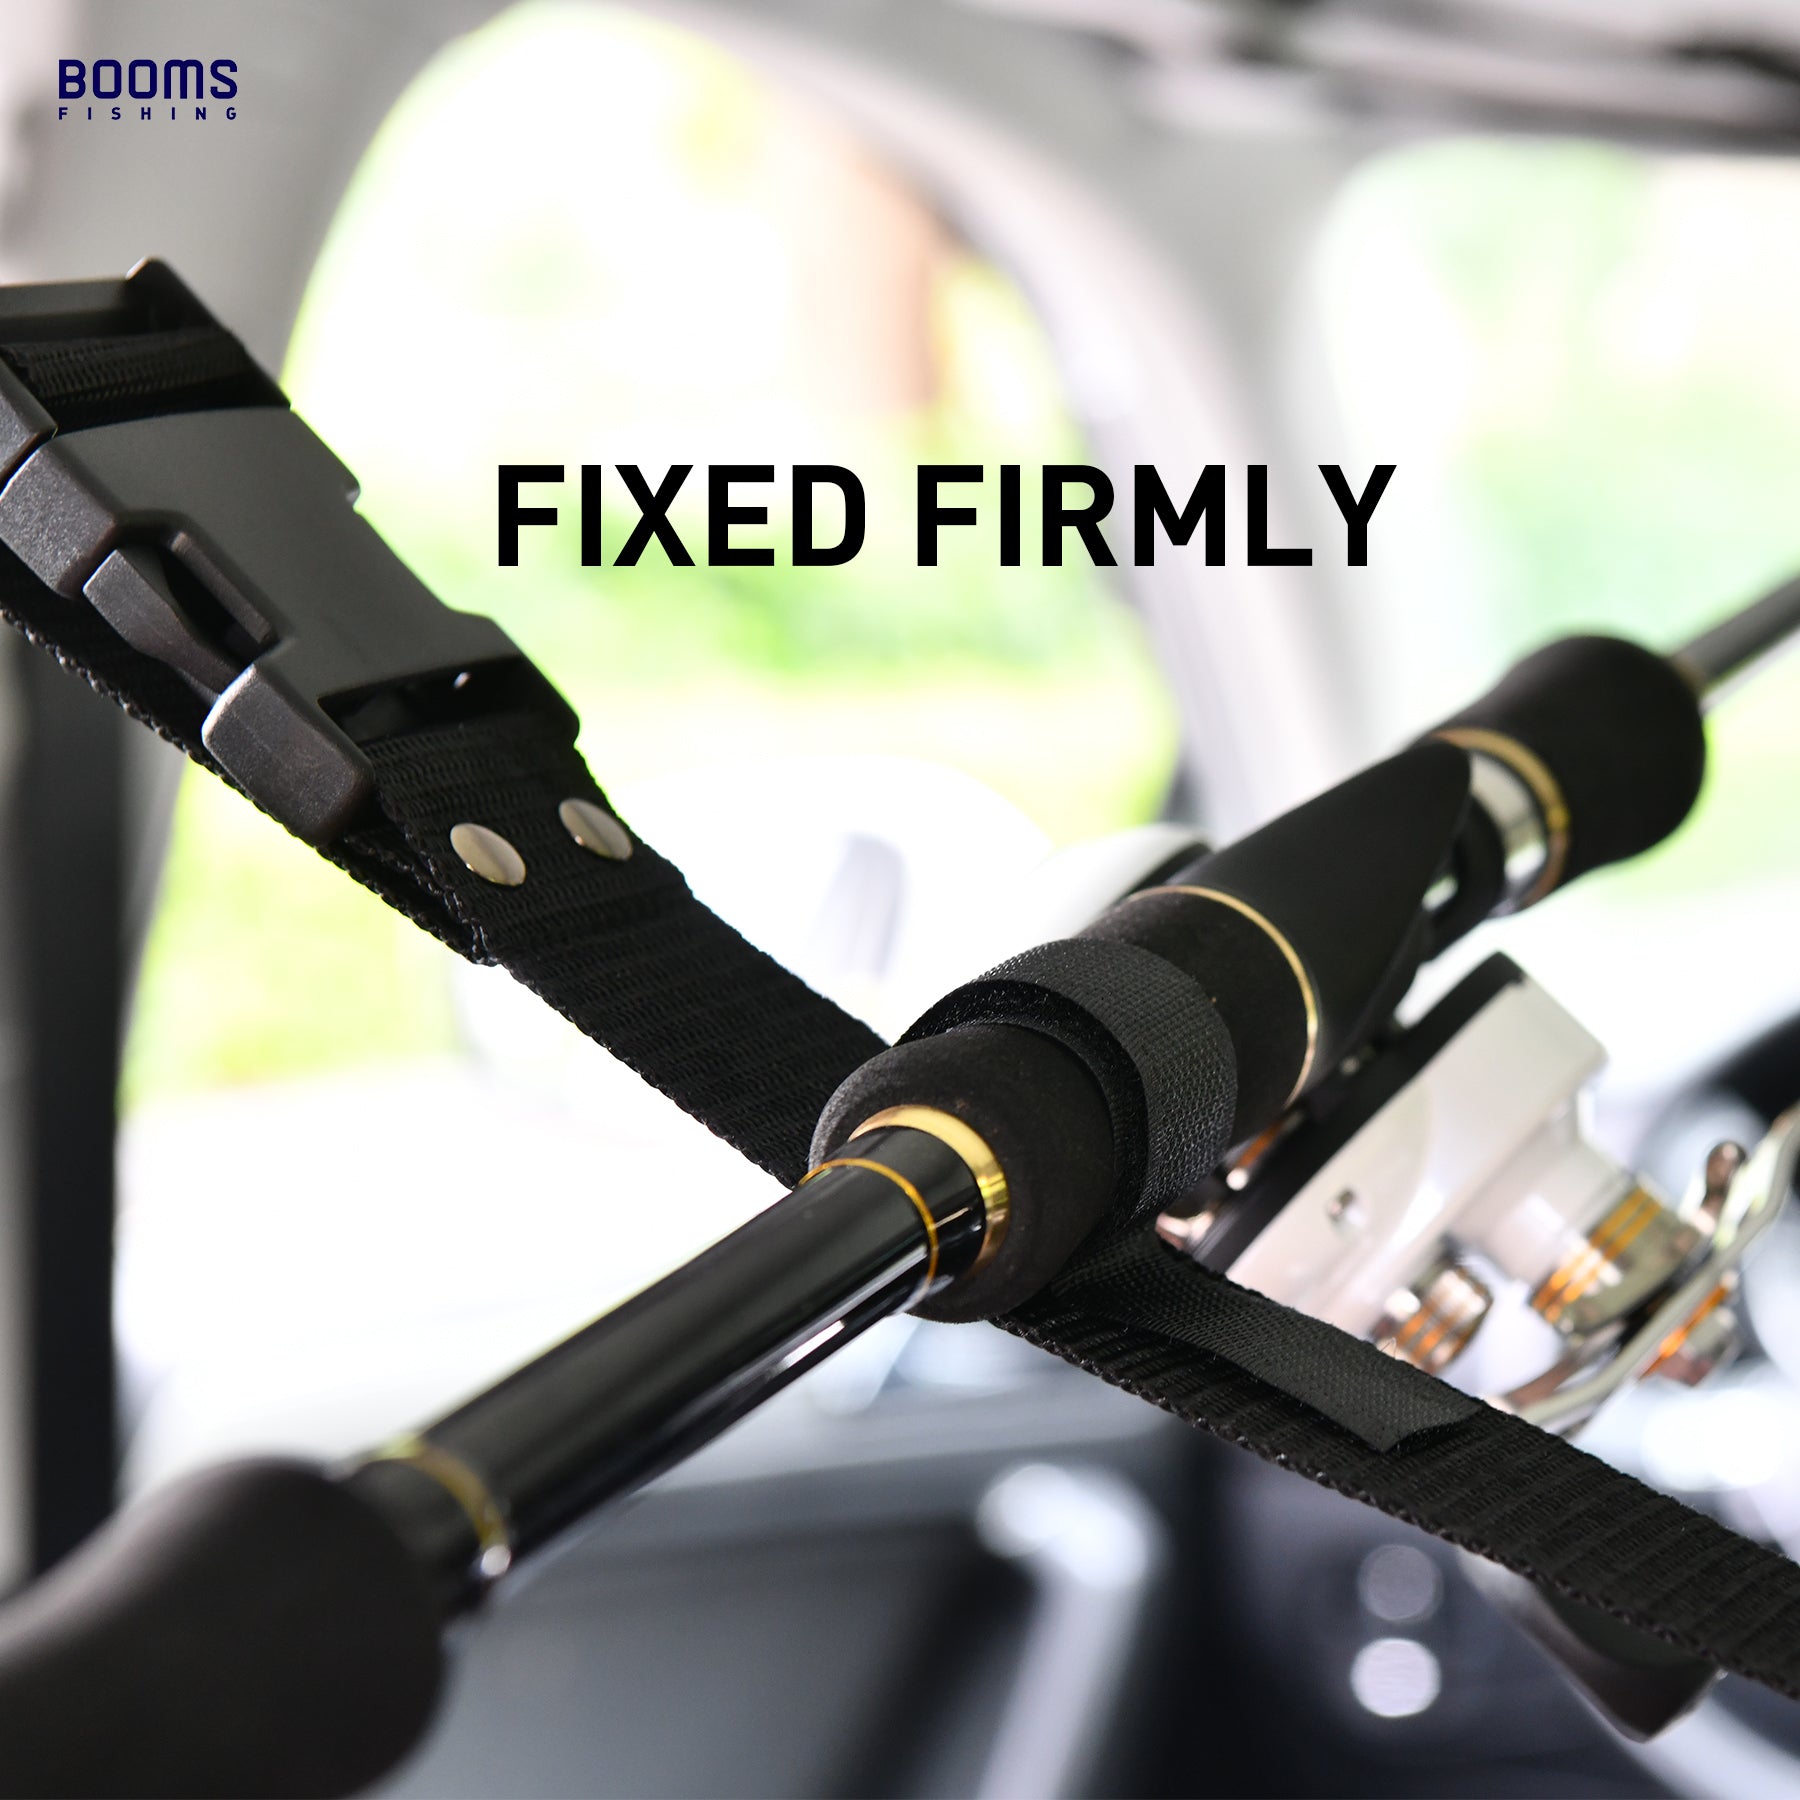 Vehicle Fishing Rods Holders Adjustable Straps For Fish Poles 2pcs Of Car  Fishing Rod Straps Fixed Fishing Fishing Accessories